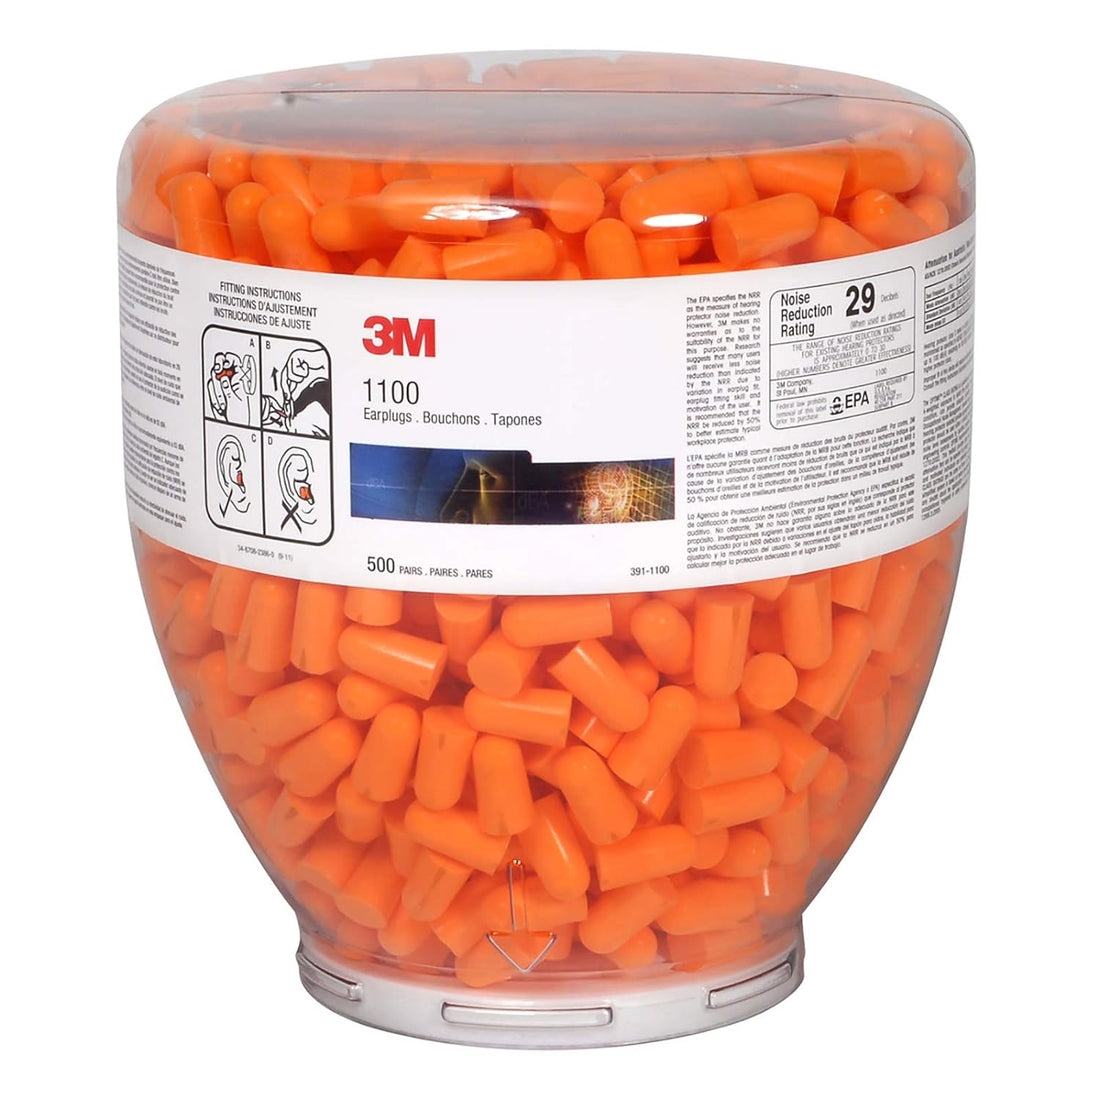 3M One Touch 1100 Earplugs Refill 391-1100 (Pack of 500)